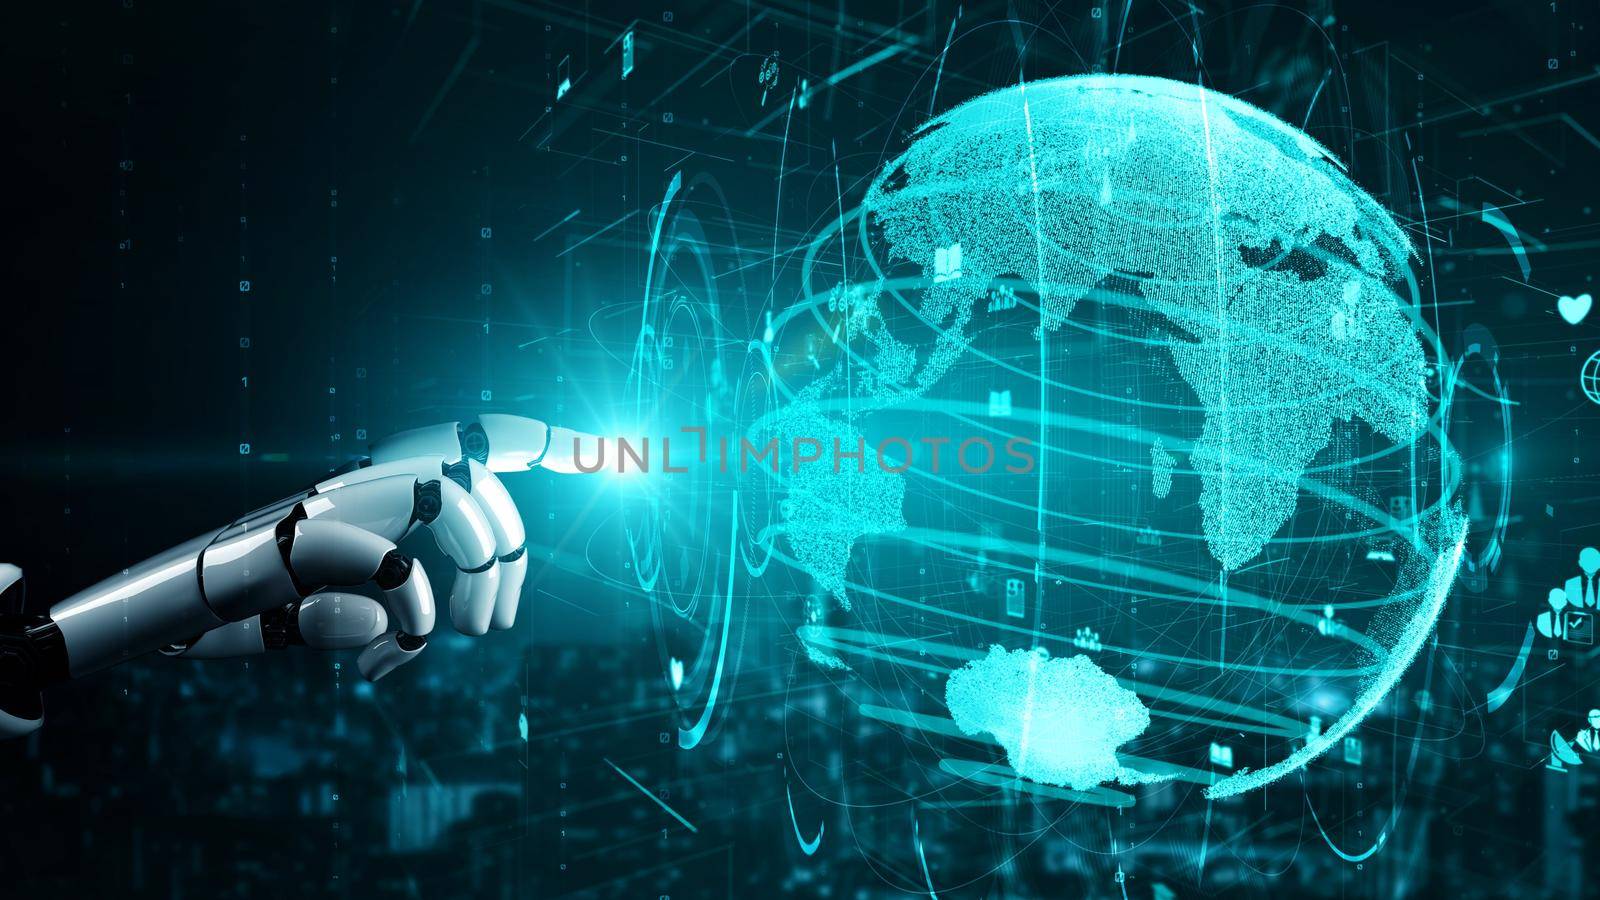 Futuristic robot artificial intelligence enlightening AI technology development and machine learning concept. Global robotic bionic science research for future of human life. 3D rendering graphic.